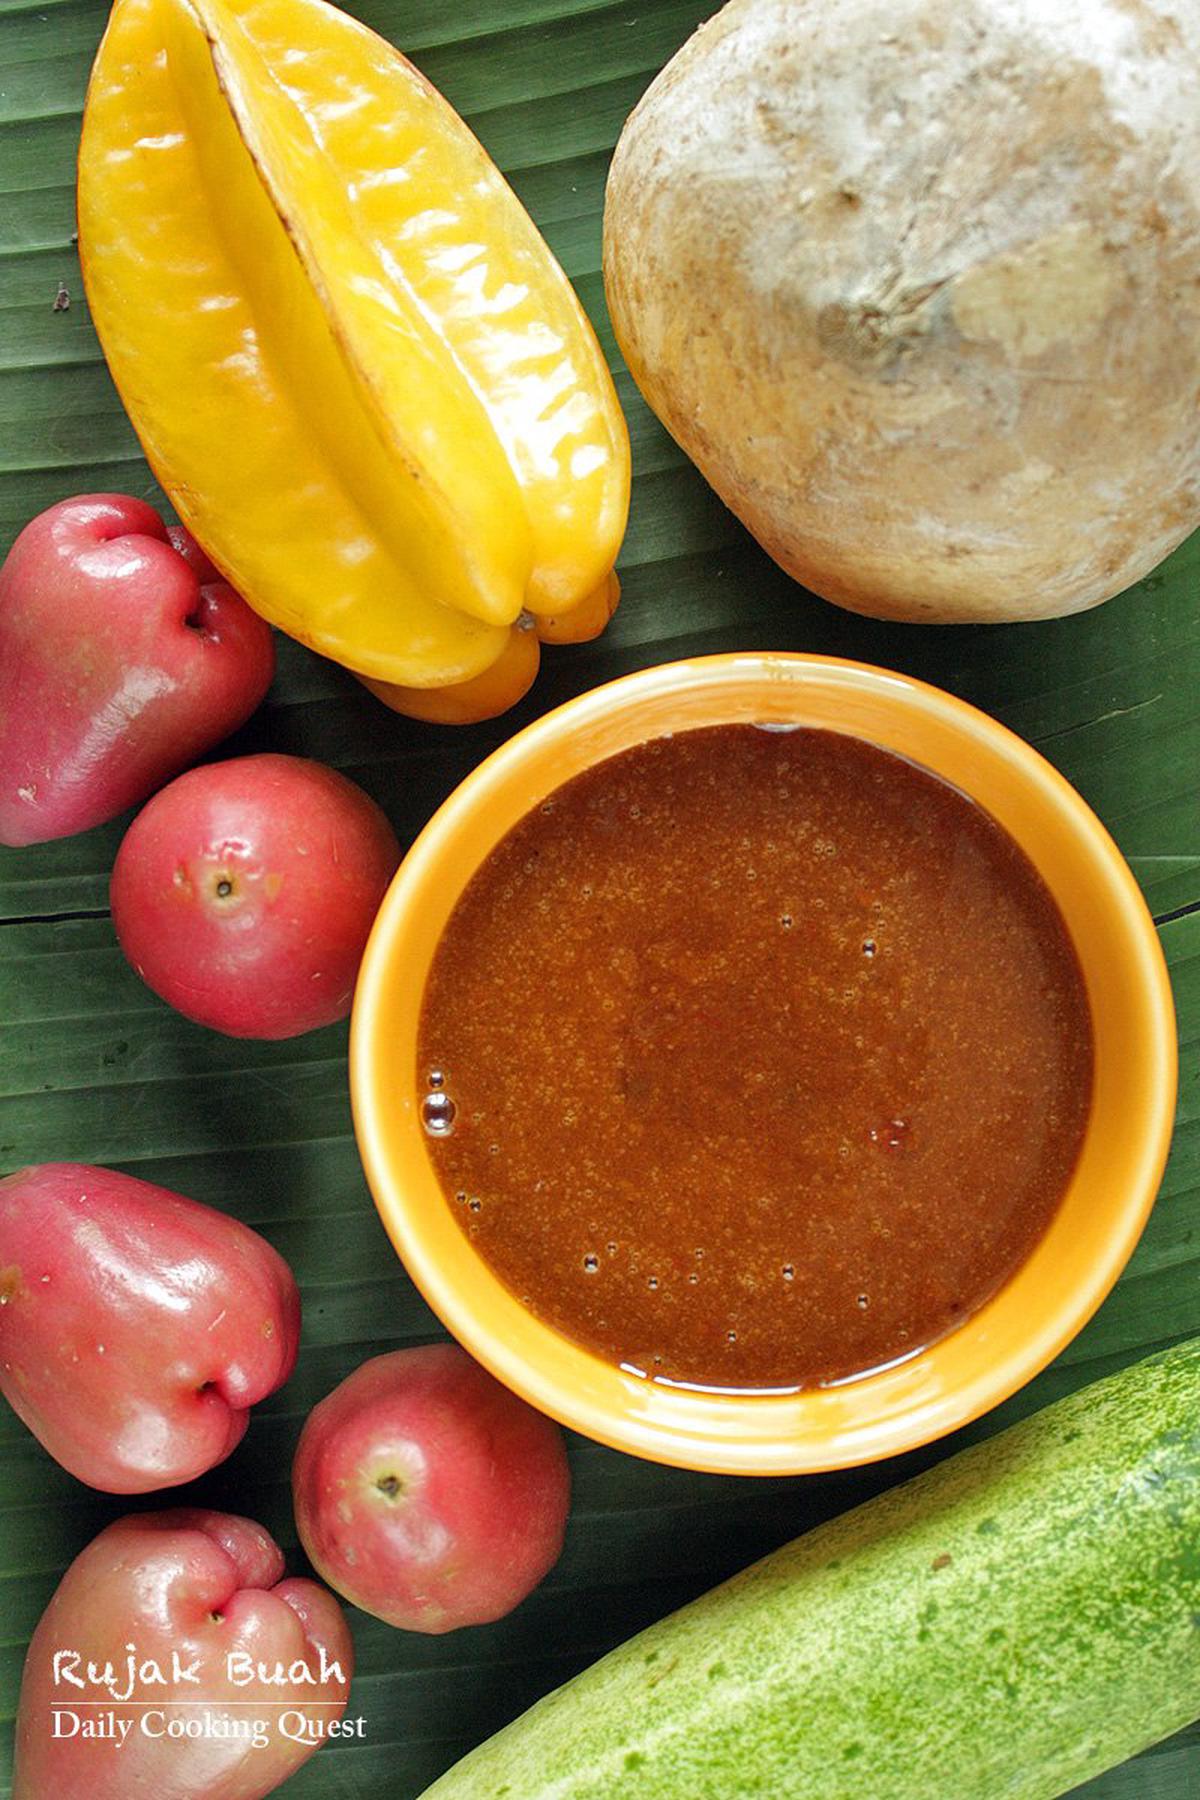 Rujak Buah - Fruit with Spicy Palm Sugar Sauce